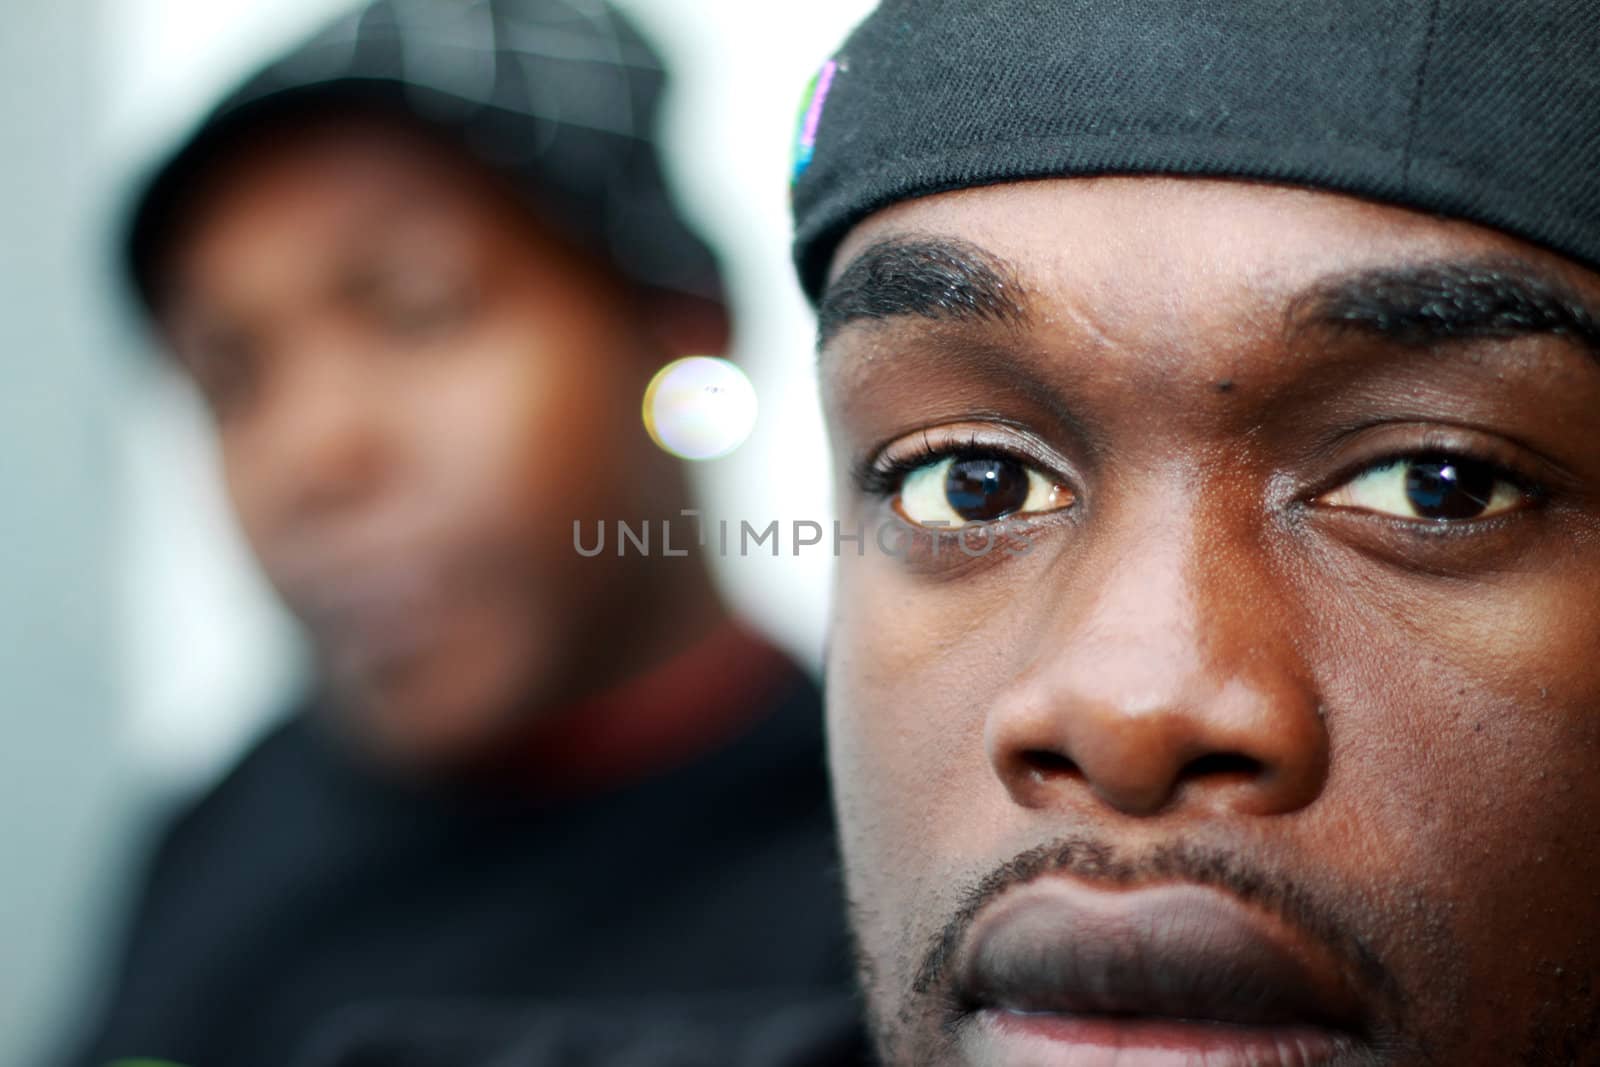 Two young African Americans. A person can be seen in the background out of focus